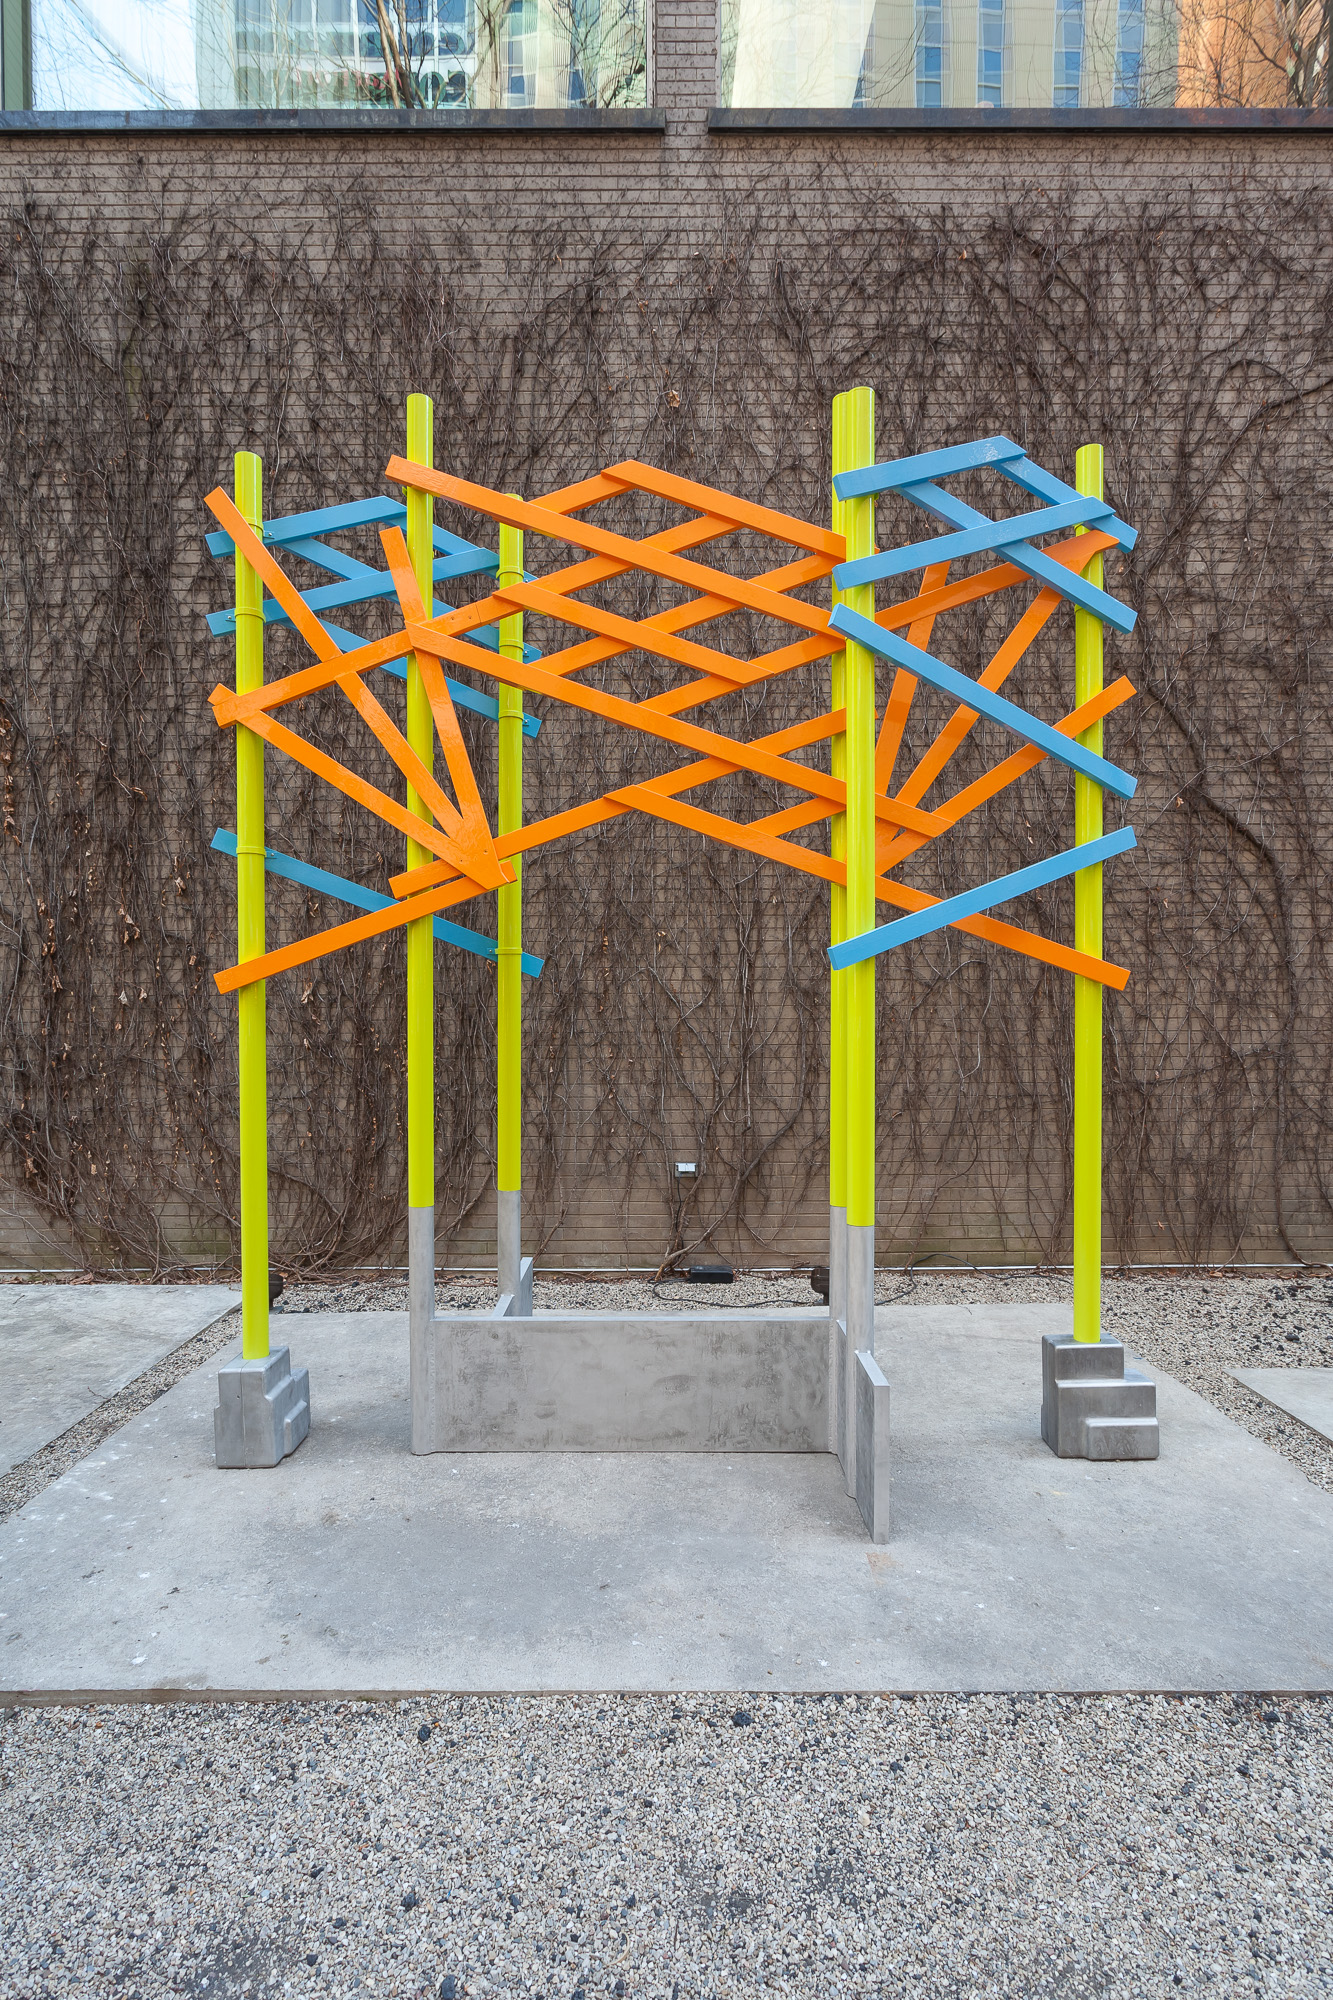 Six bright green poles attached to the ground with cast metal bases. The green poles are interconnected through bright orange and blue latticework, forming an arch or gate.